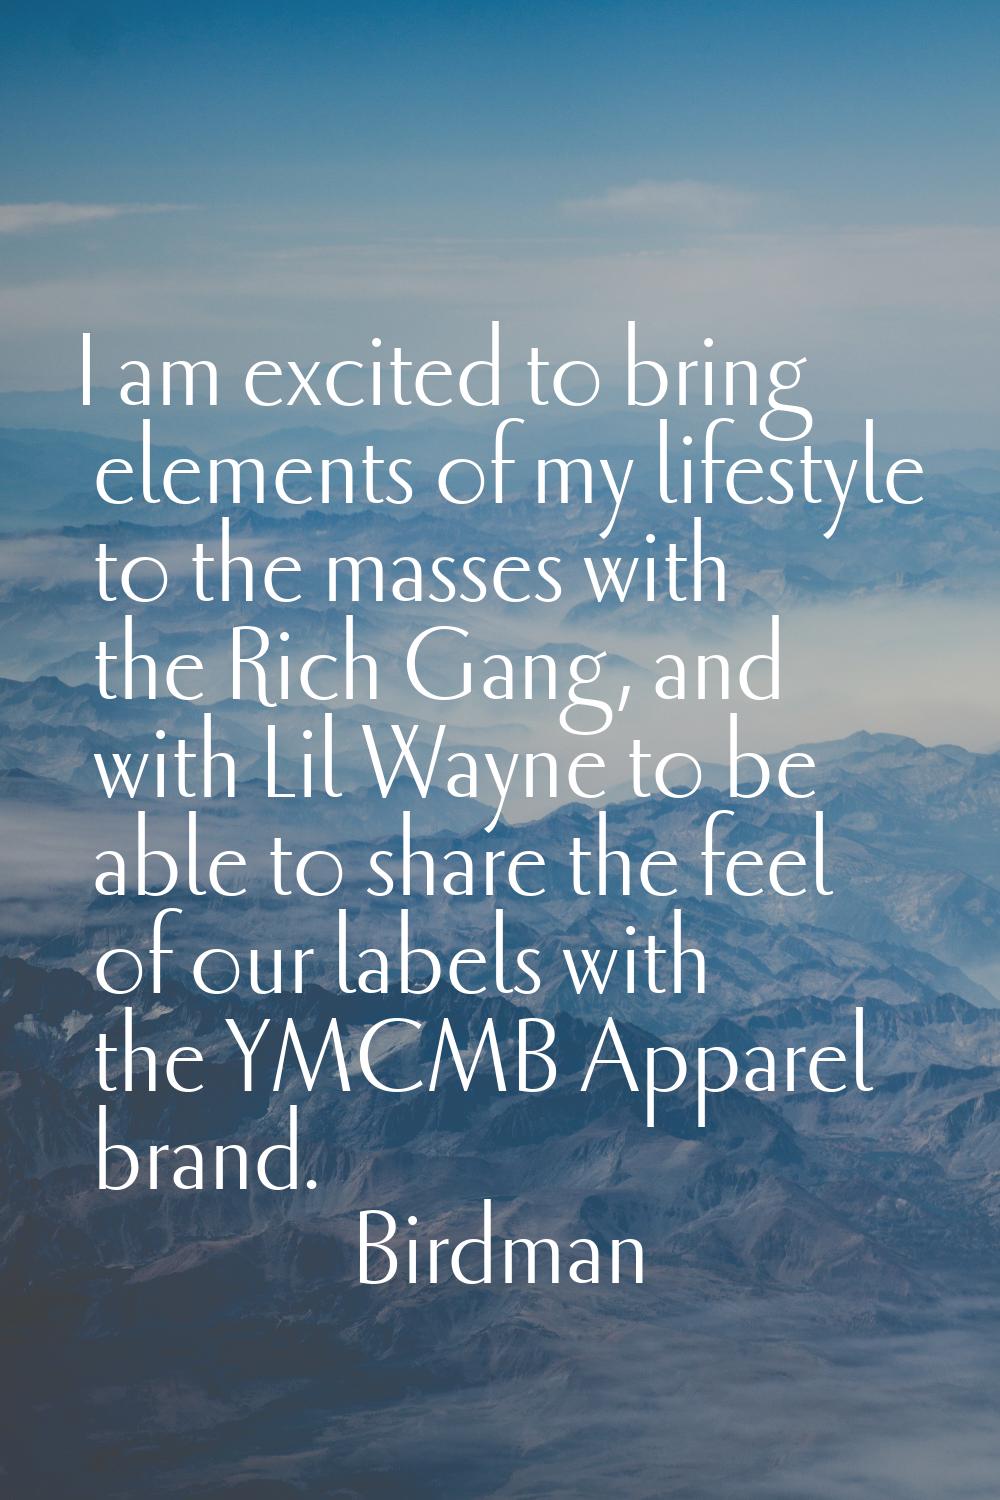 I am excited to bring elements of my lifestyle to the masses with the Rich Gang, and with Lil Wayne